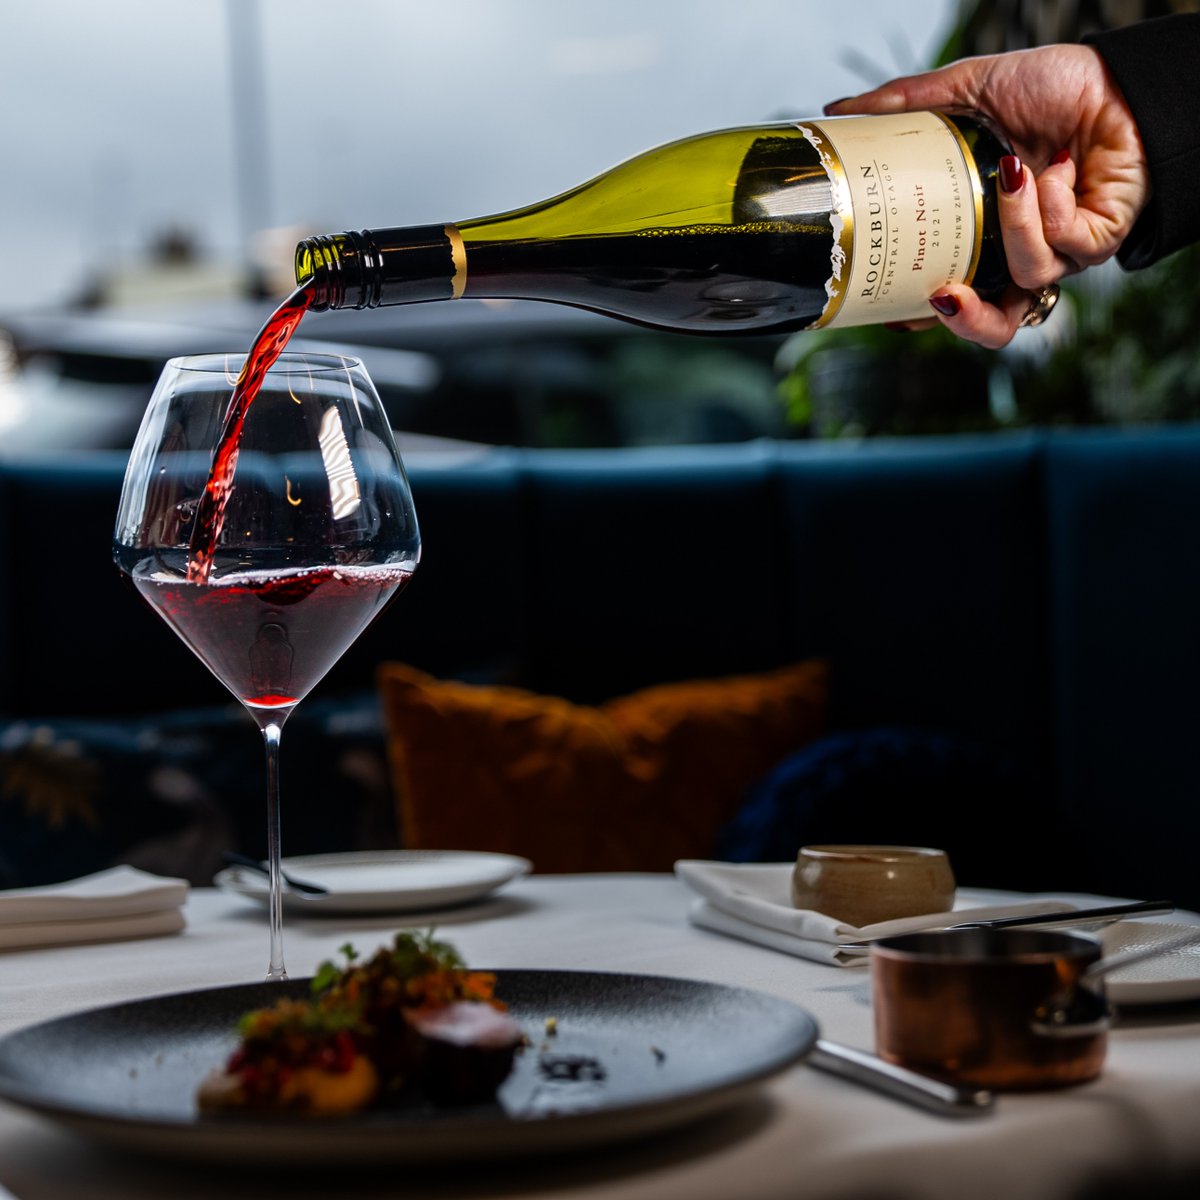 At Prithvi, we're rolling out the red carpet just for you. Take a seat and let our team shower you with incredible food and drinks from a unique menu, served with a smile! 🍷 @michelinguideuk @hardensbites @goodfoodguideuk @squaremeal #Cheltenham #FineDining